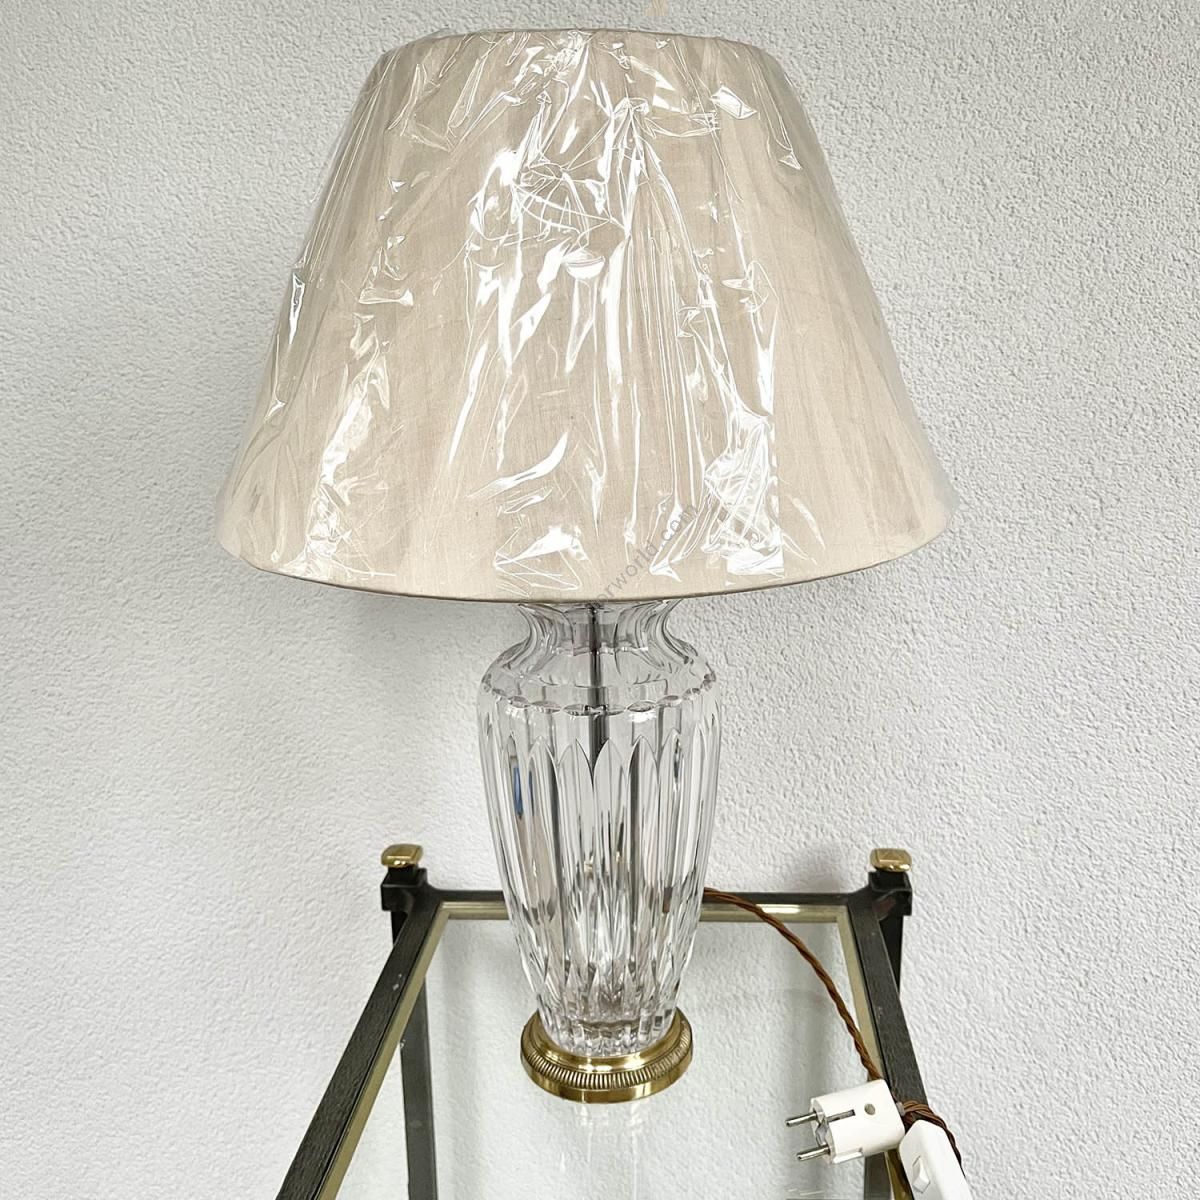 Cut Glass Table Lamp by Vaughan In Stock - 50% OFF